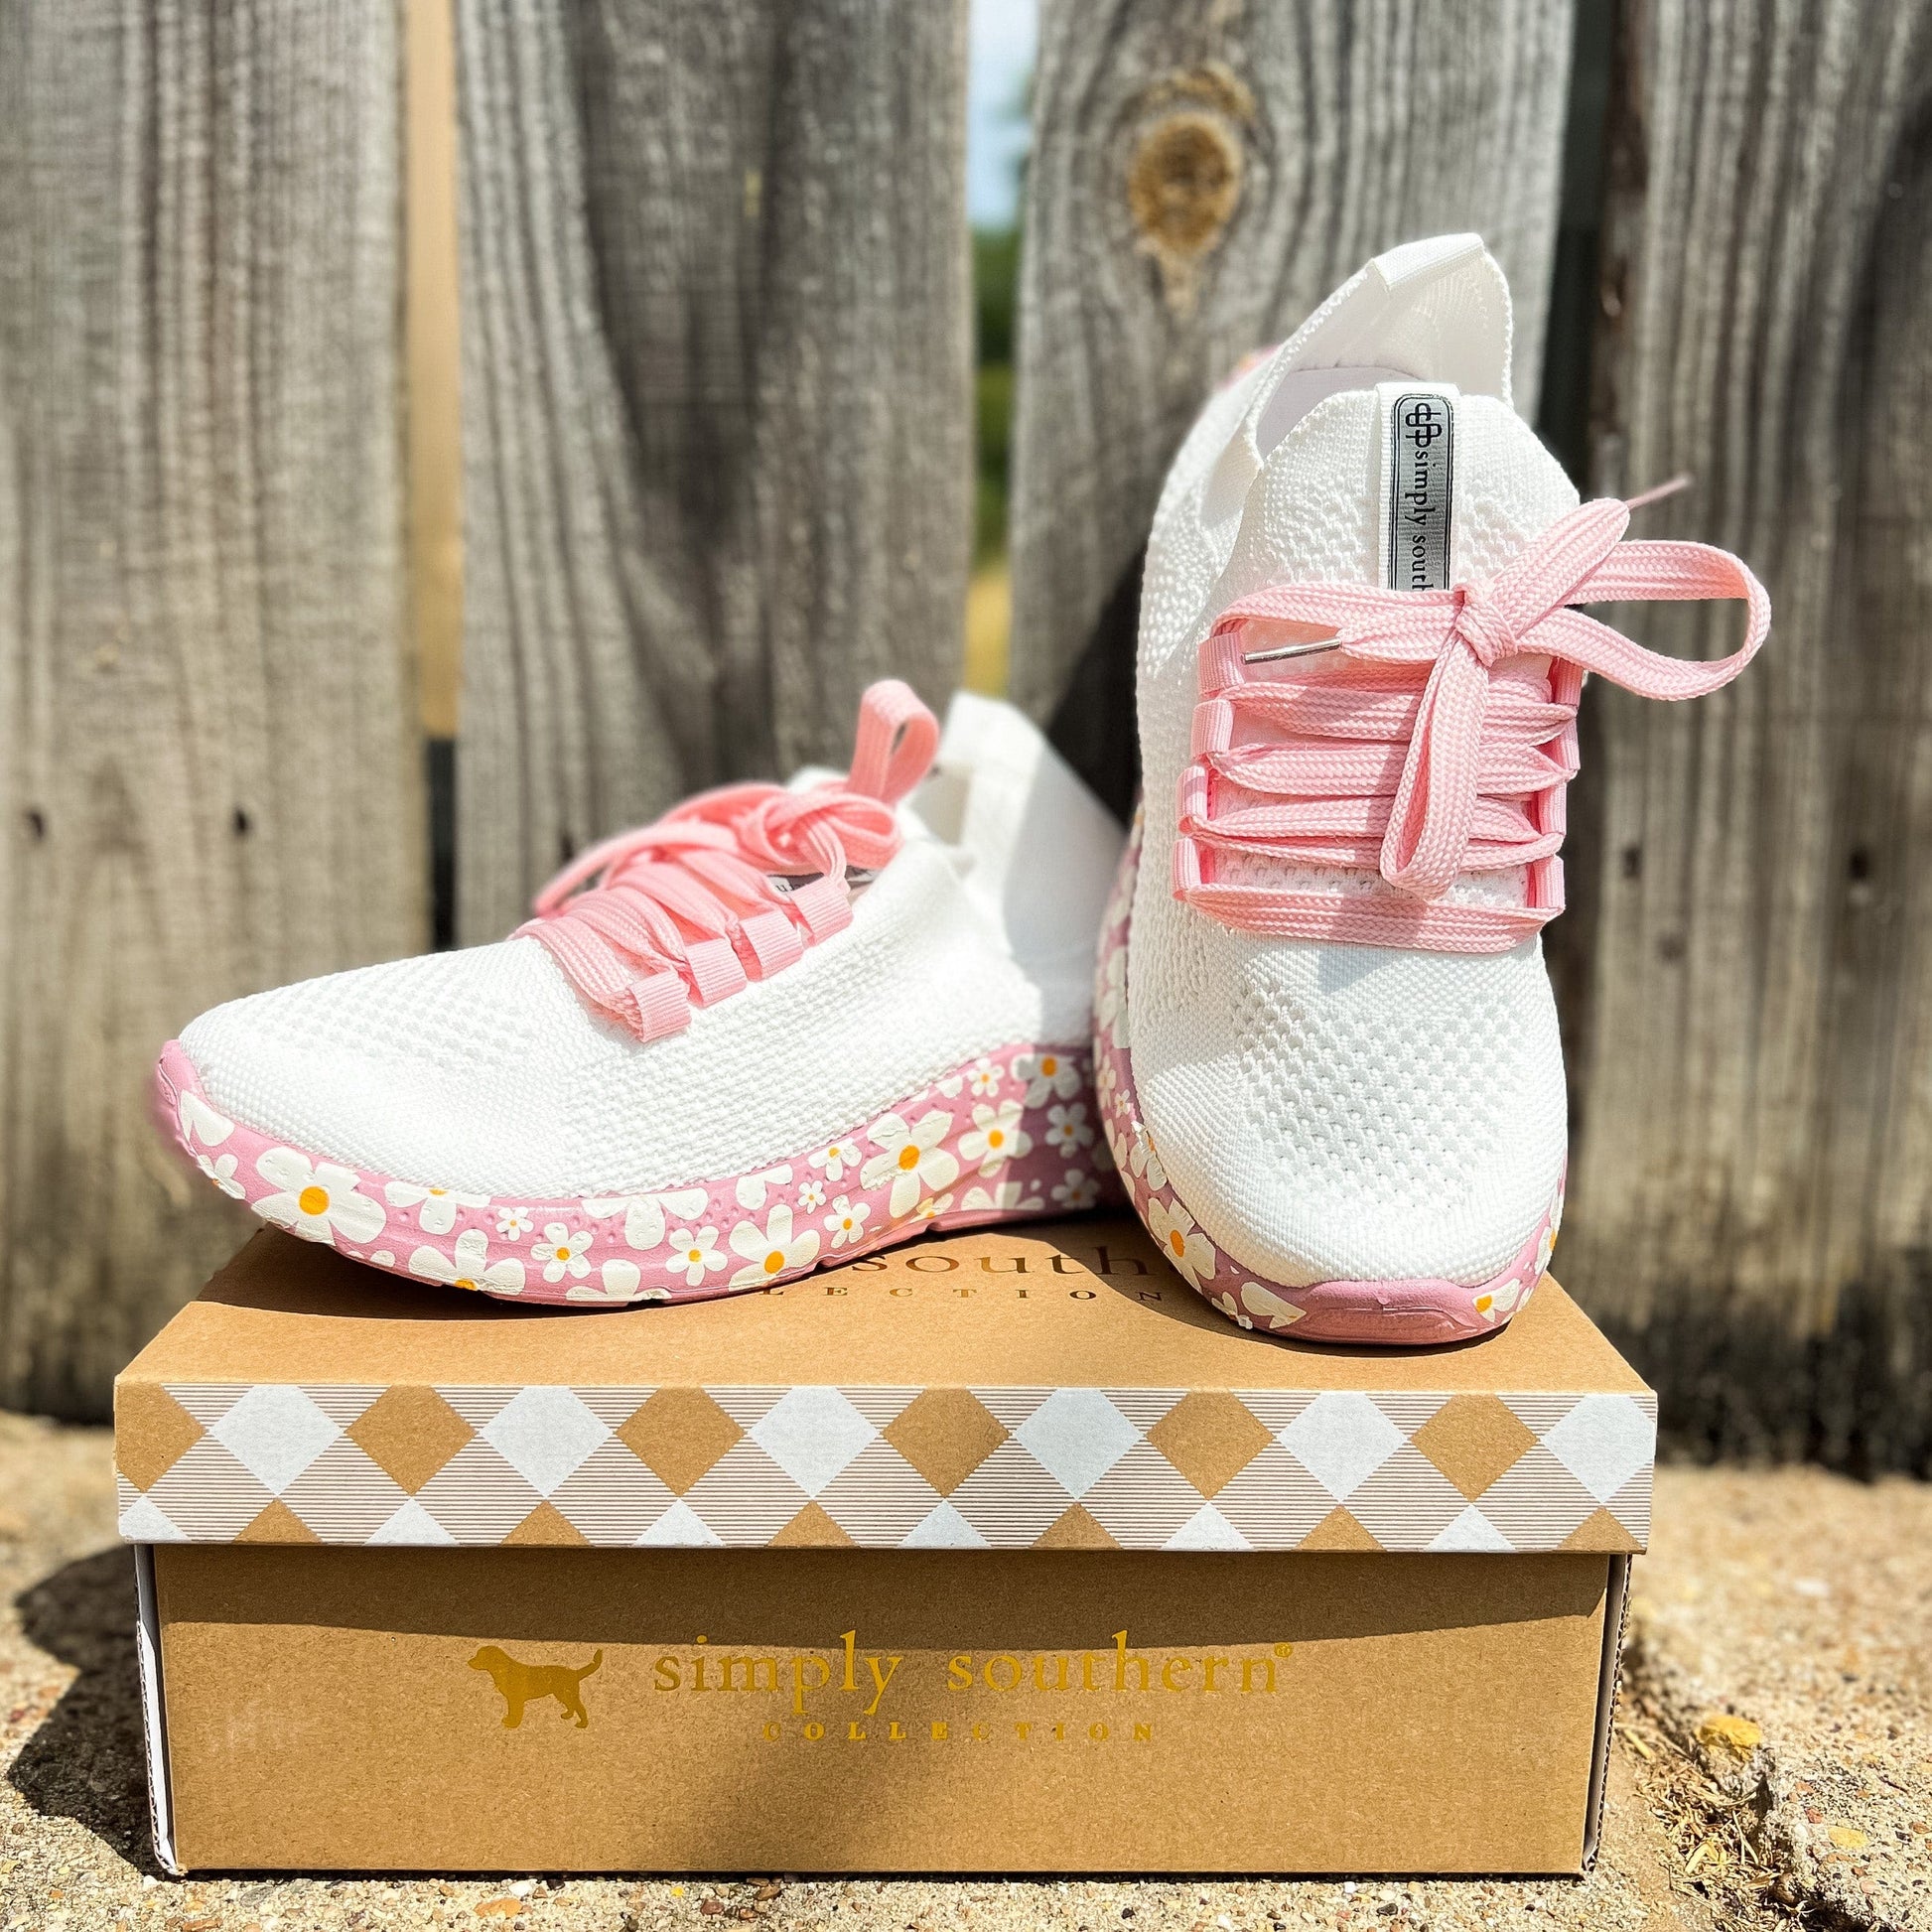 Envy Stylz Boutique Women - Apparel - Shirts - T-Shirts The Flower Child Sneakers Simply Southern